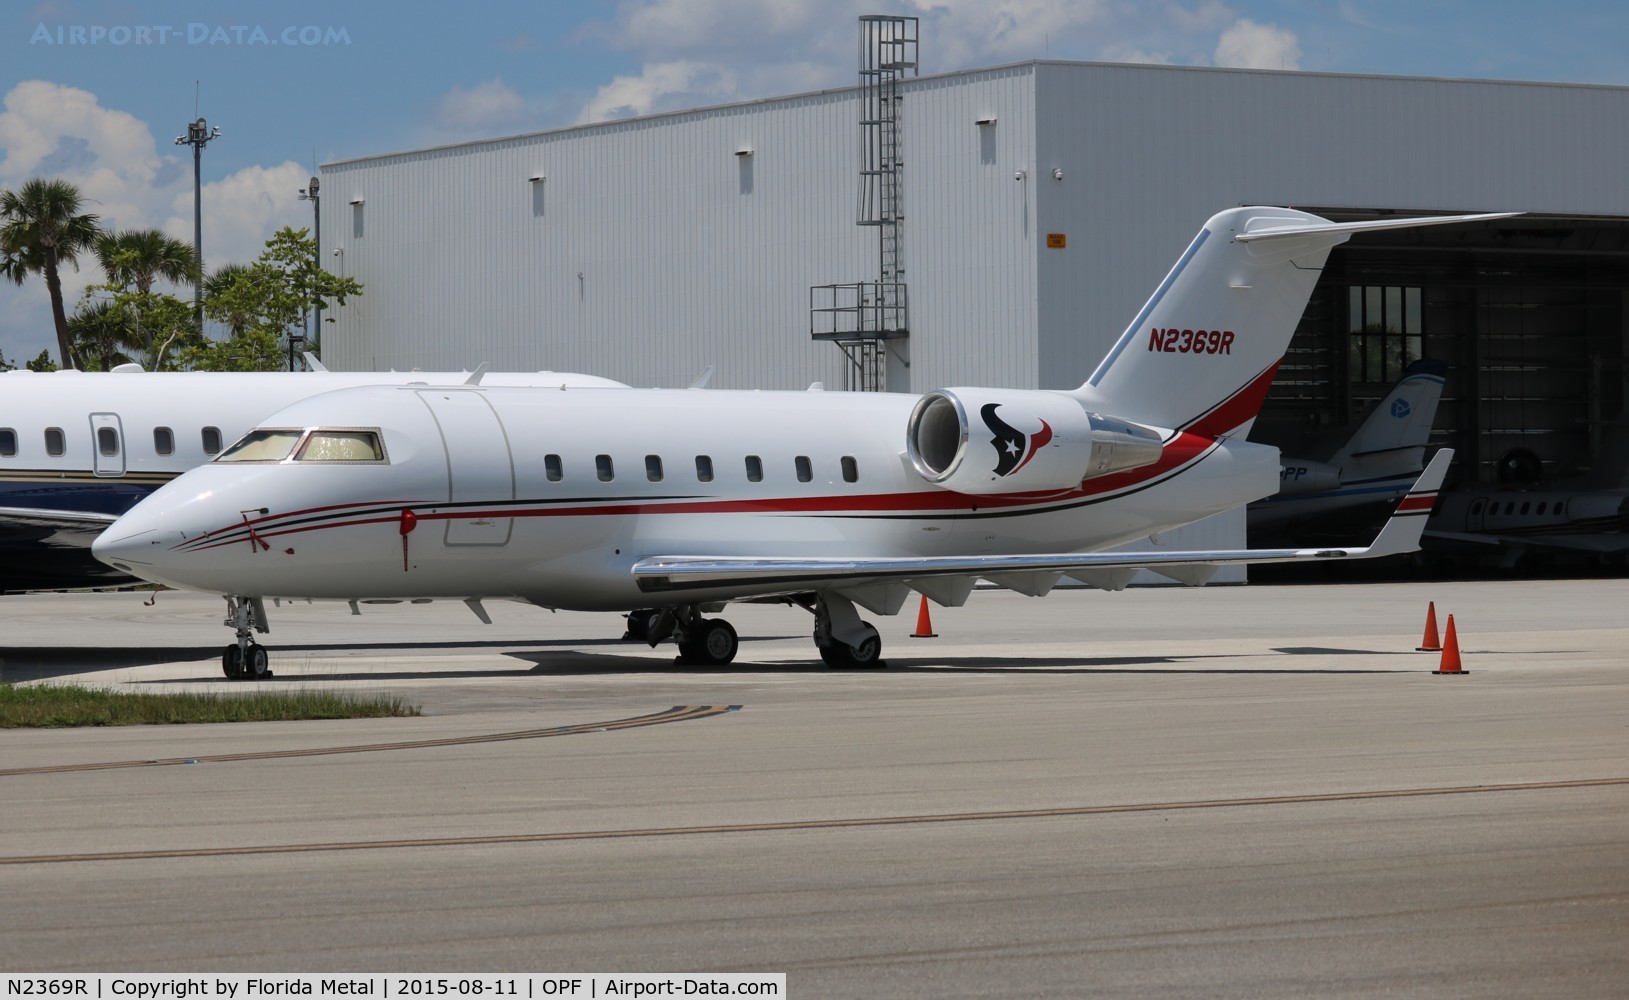 N2369R, 1993 Canadair Challenger 601-3A (CL-600-2B16) C/N 5134, Challenger 601 belonging to the Houston Texans